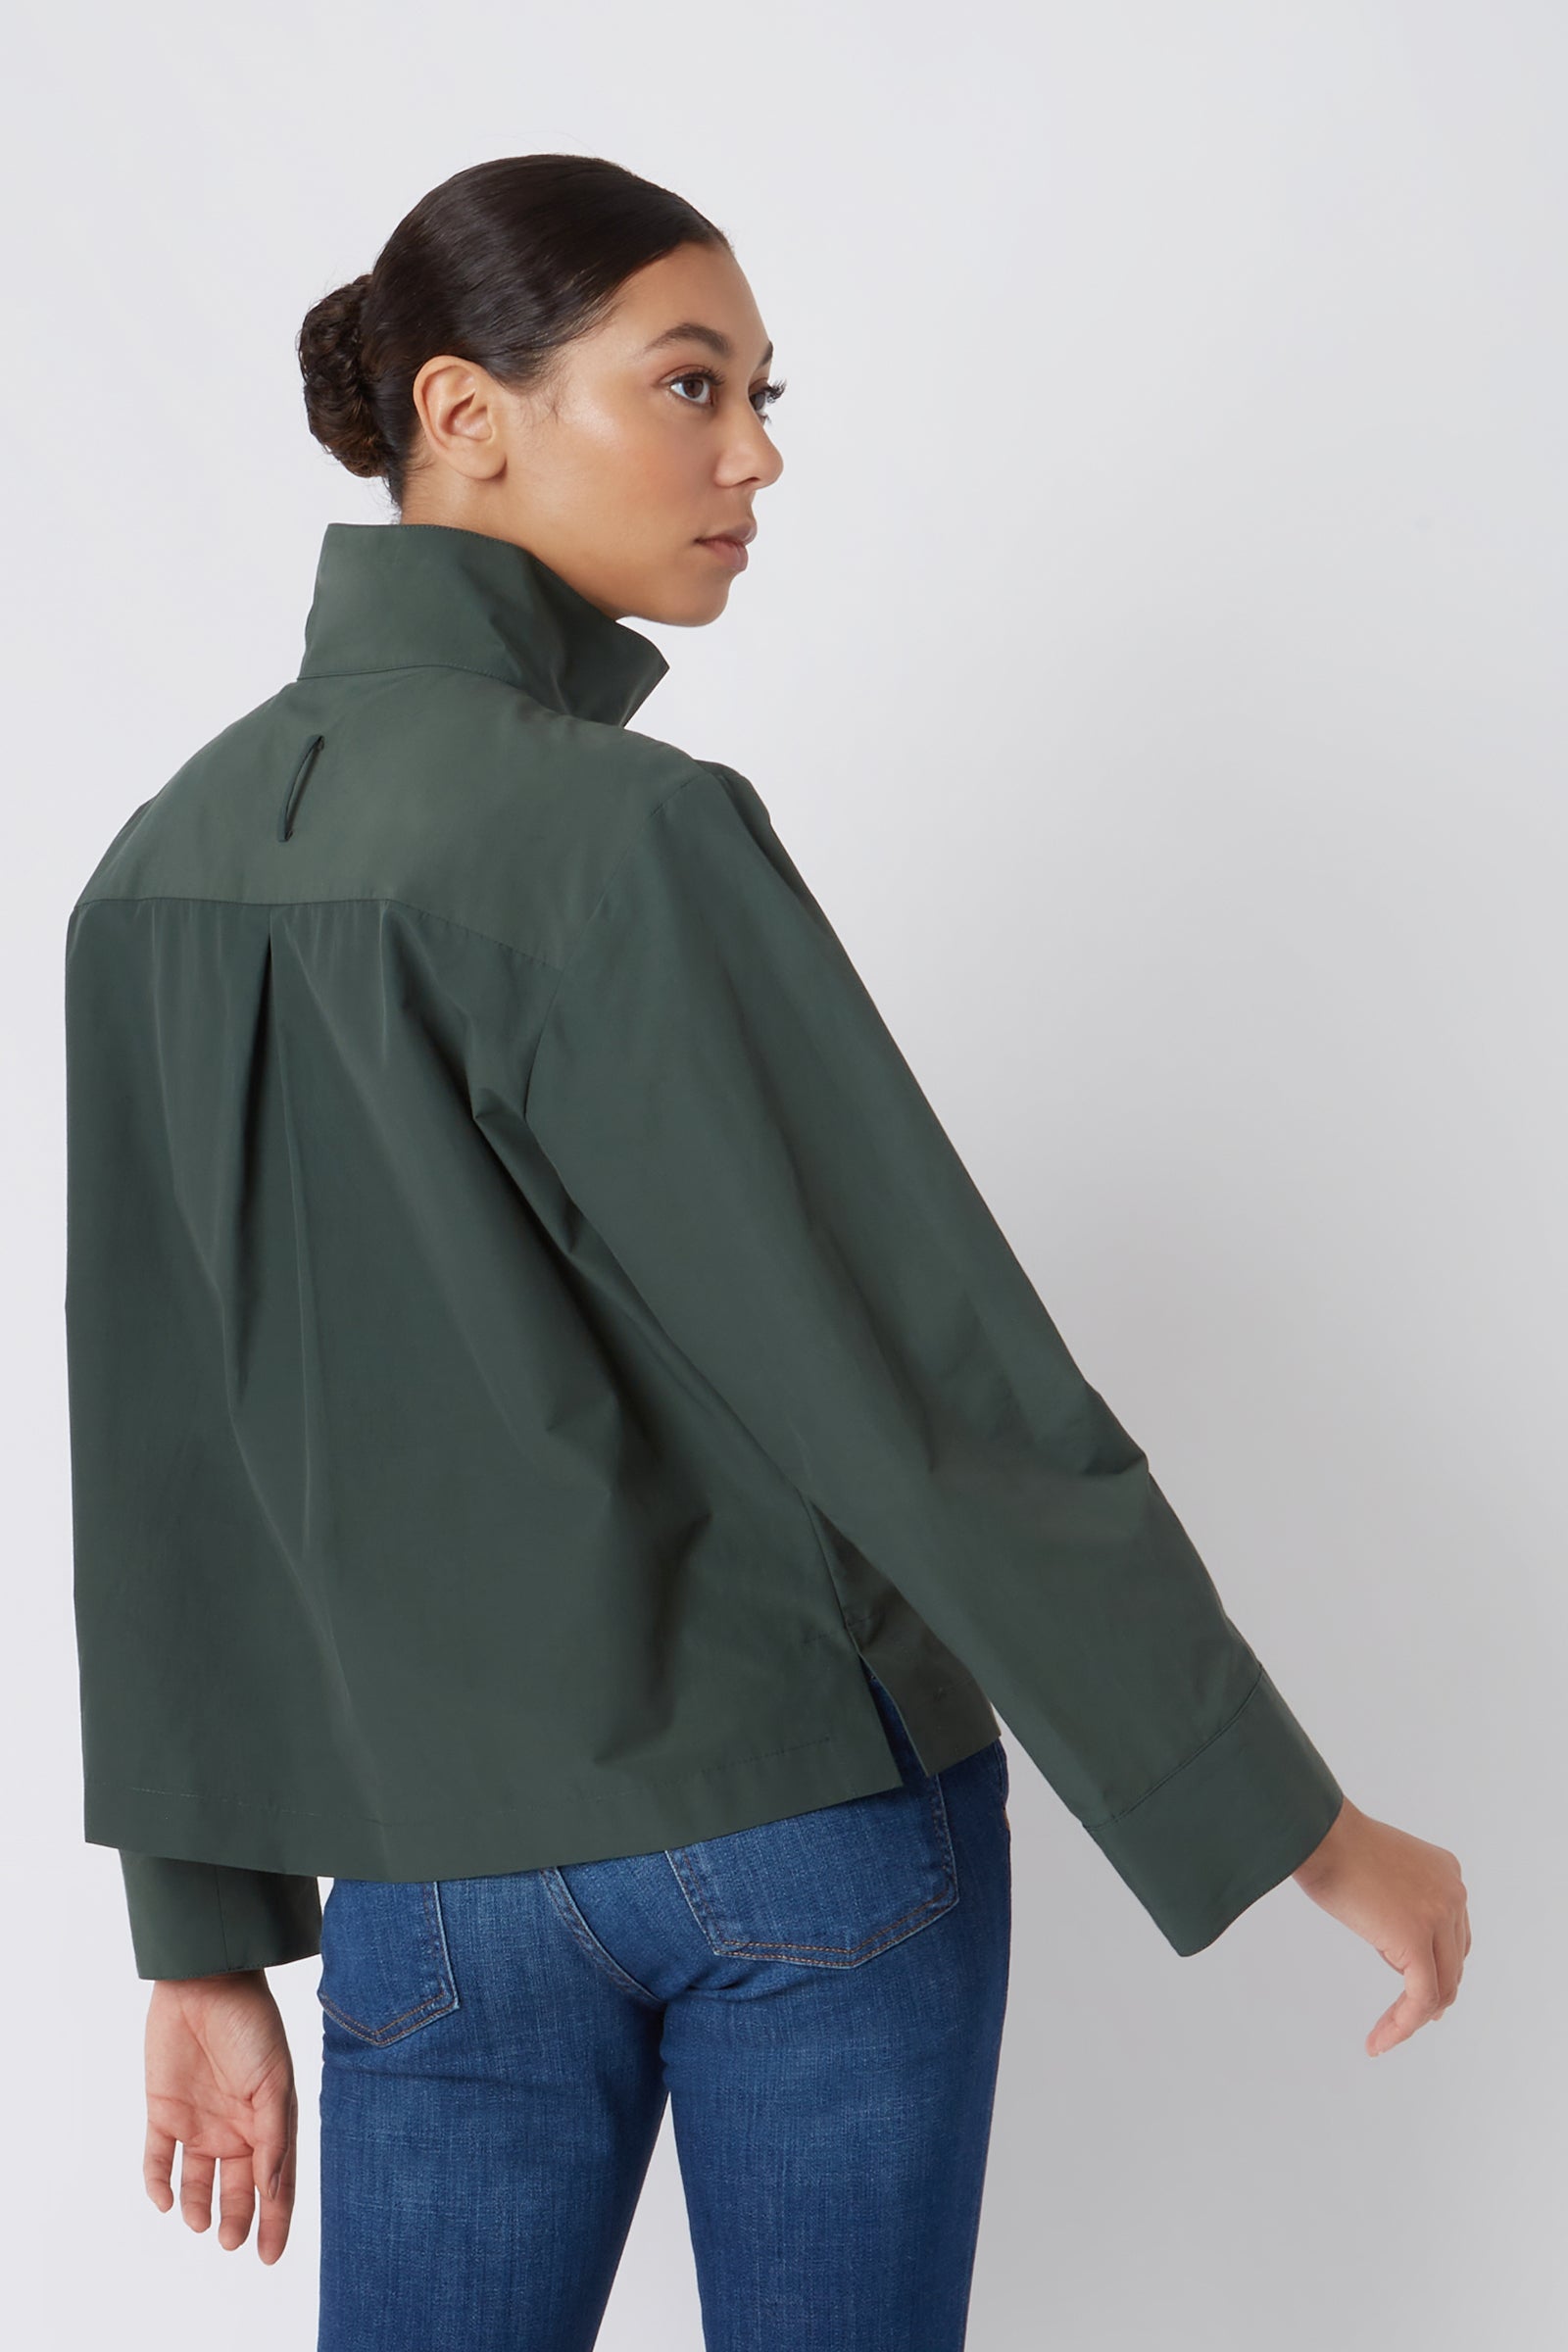 Kal Rieman Peggy Collared Shirt in Loden Broadcloth on Model Cropped Back View